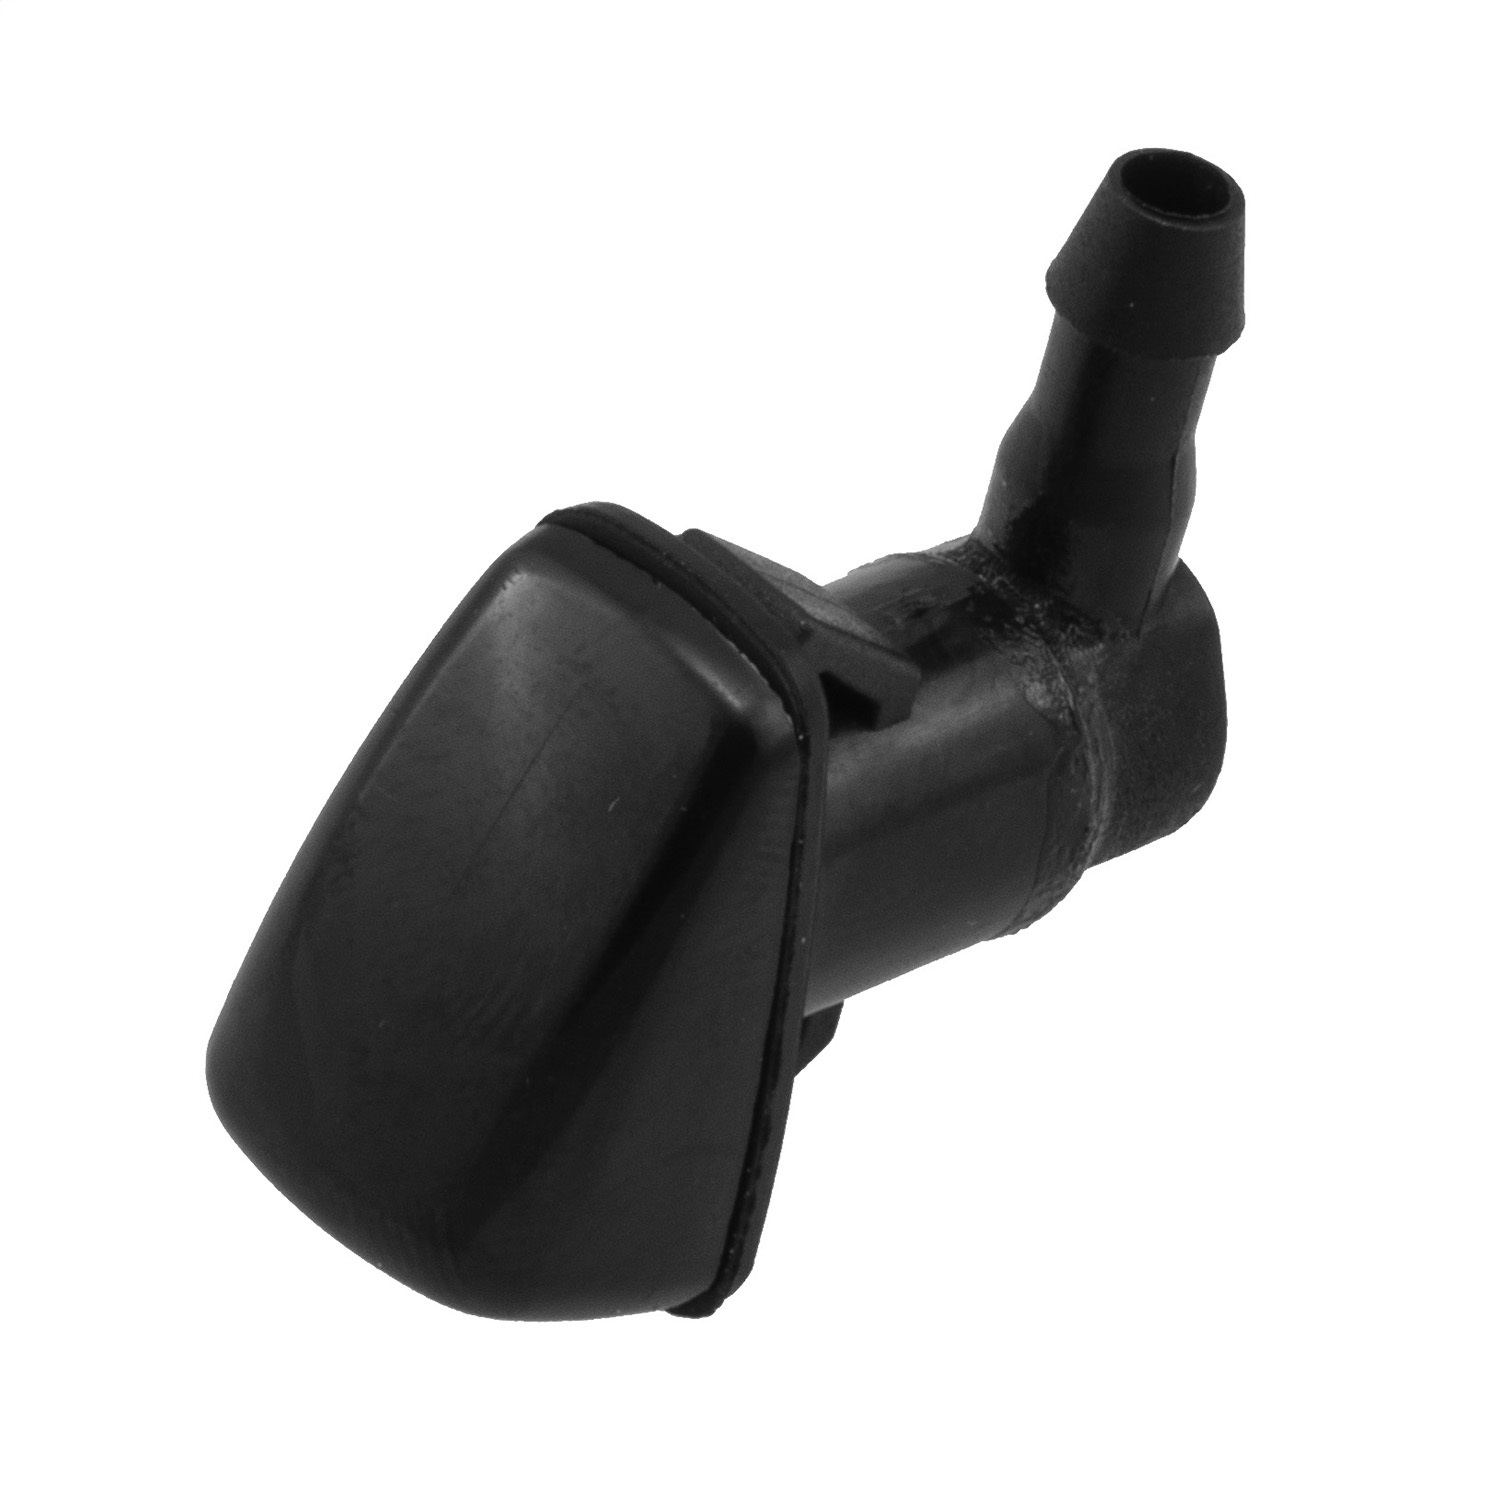 Omix This Windshield Washer Nozzle From Omix-Ada Fits 11-19 Jeep Grand Cherokee Wk., BKGF-19718.04